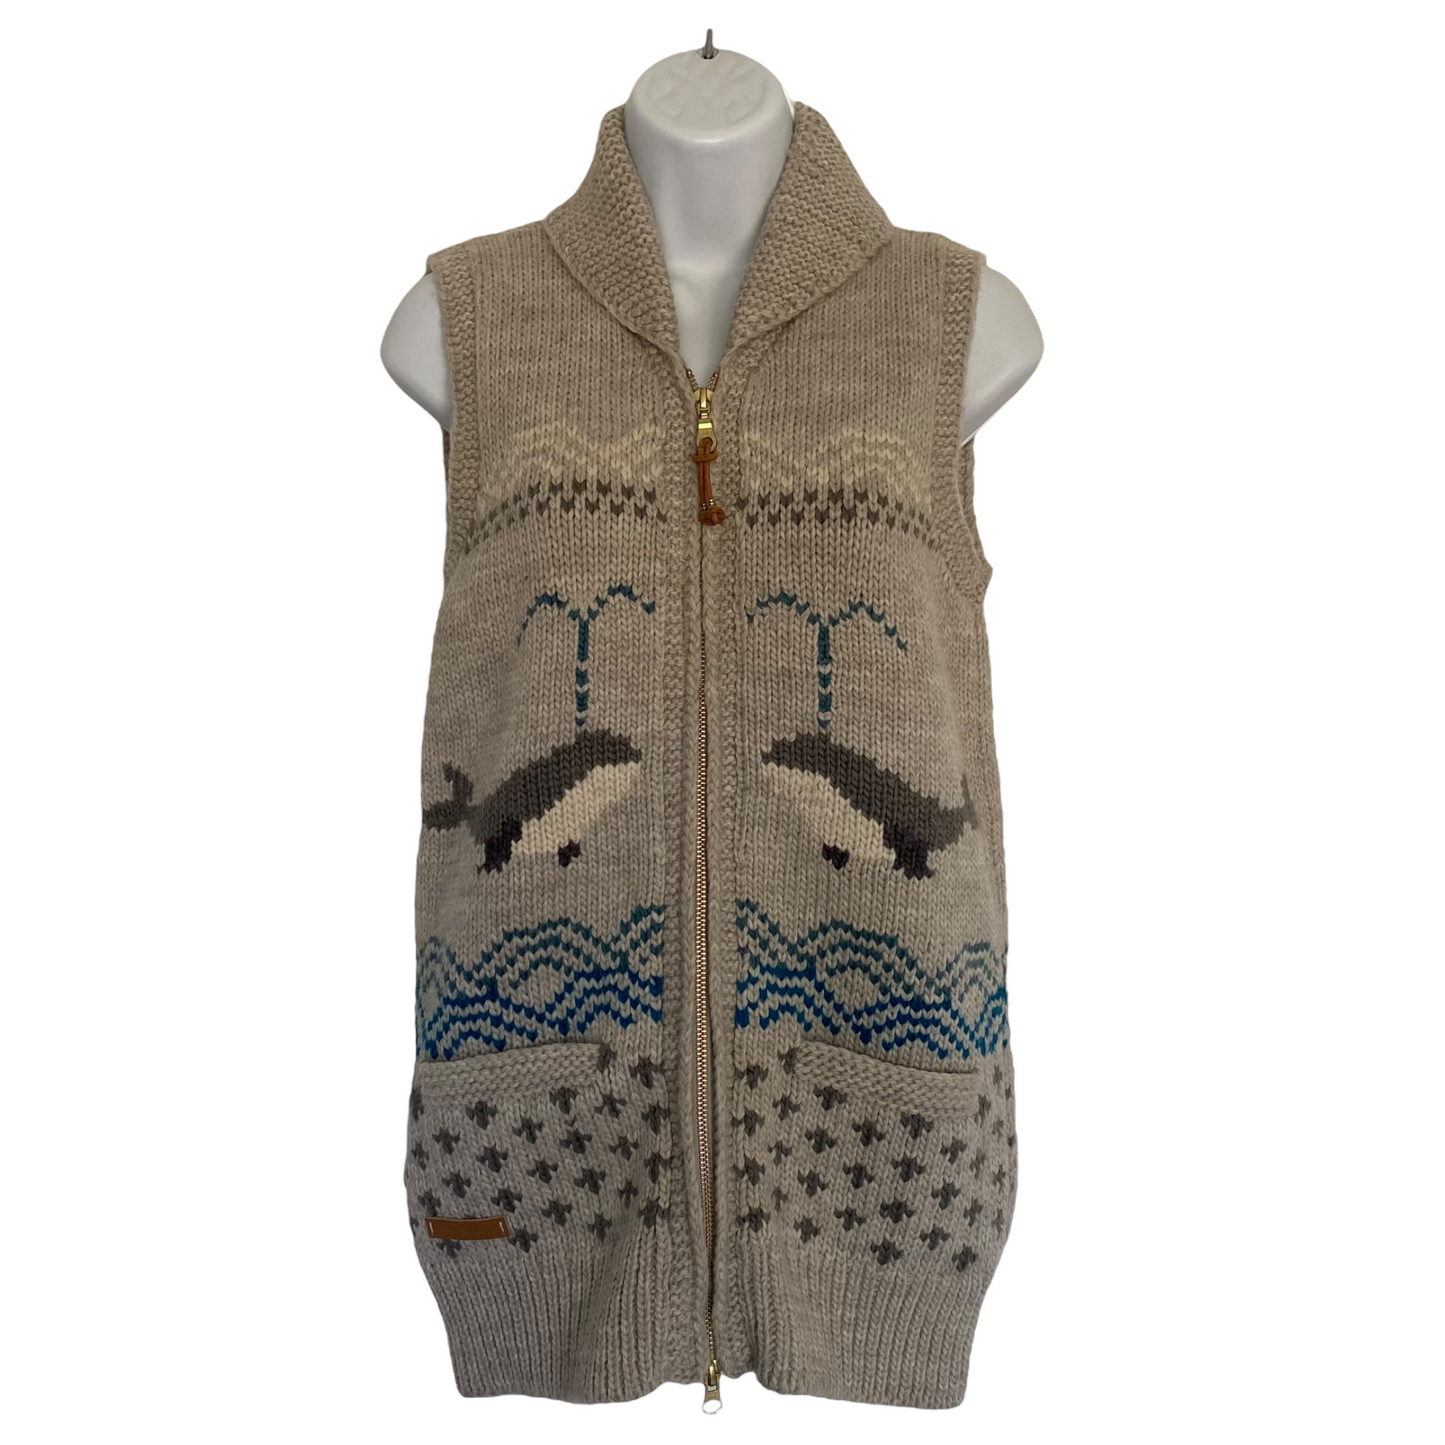 Granted Sweater Co. Wool Knit Vest Size Small